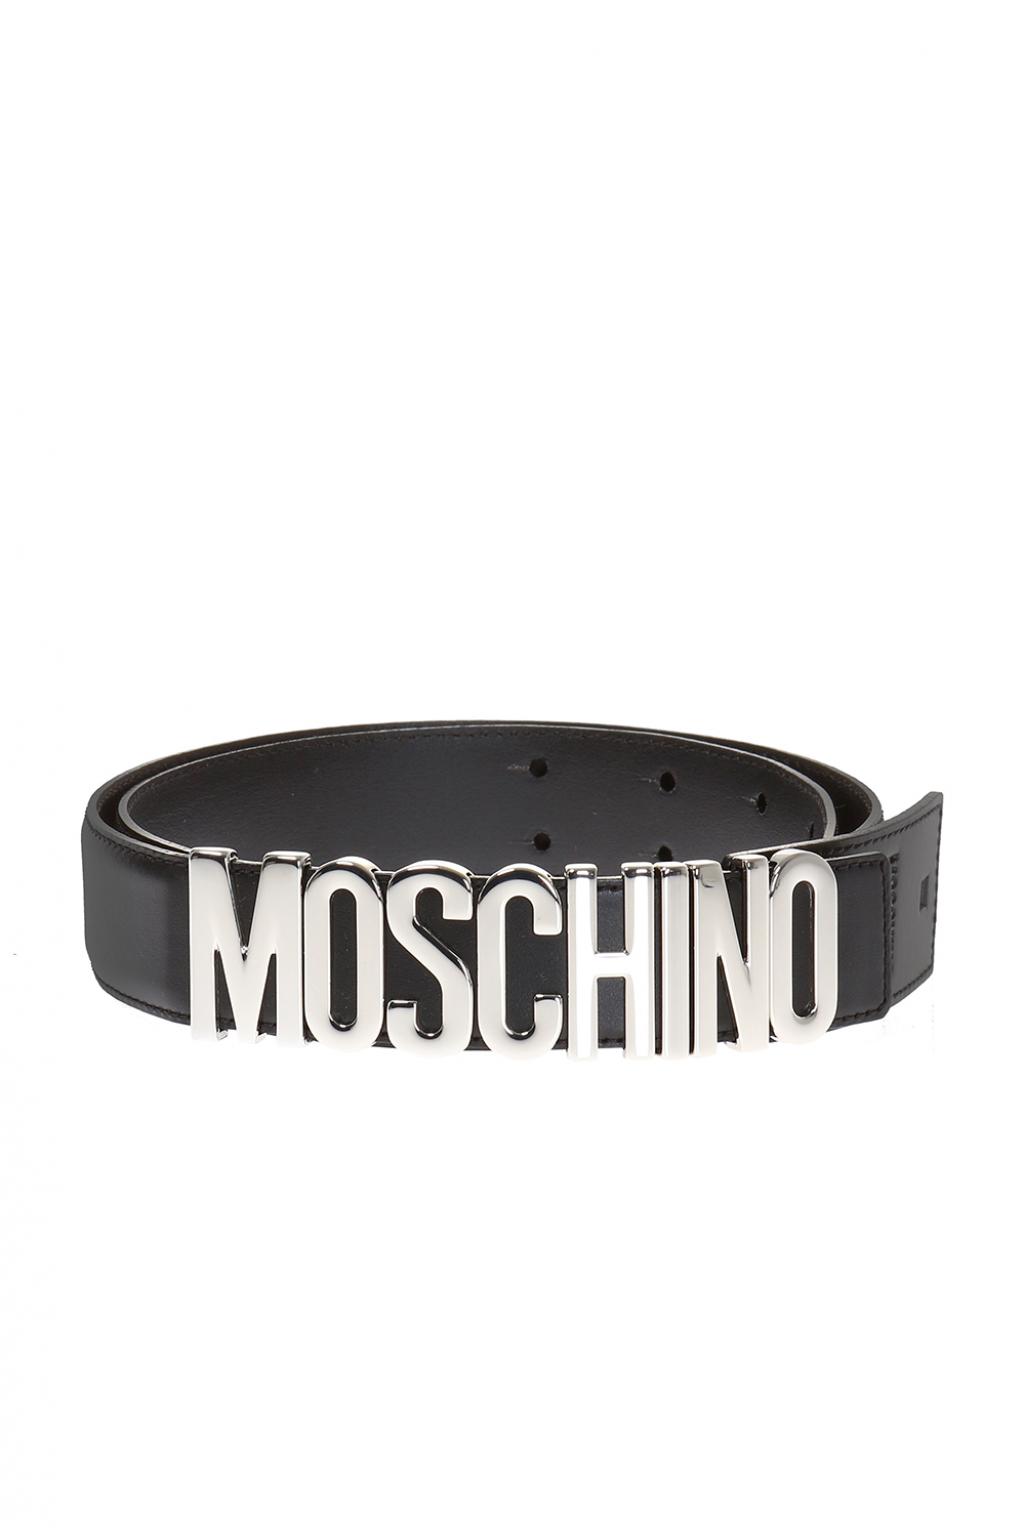 black and silver moschino belt